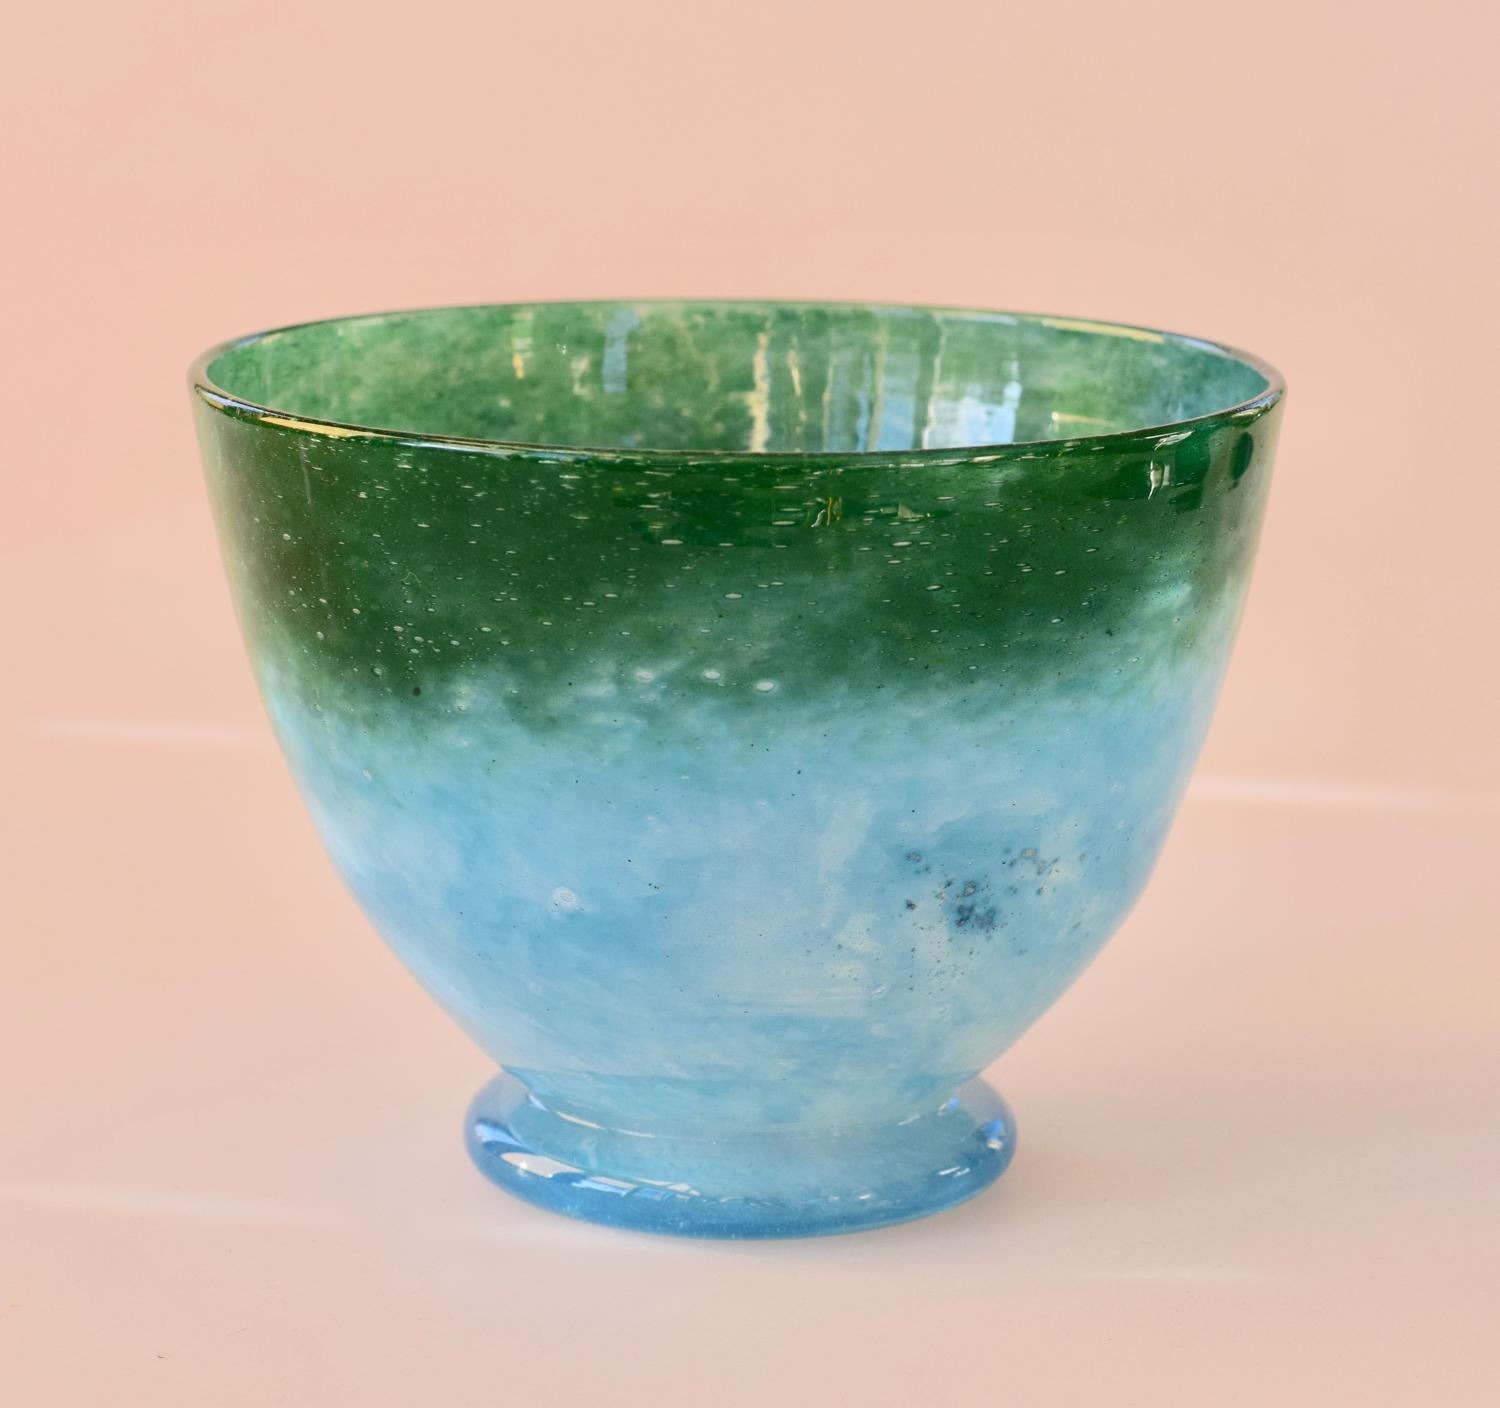 Small green cloudy bowl